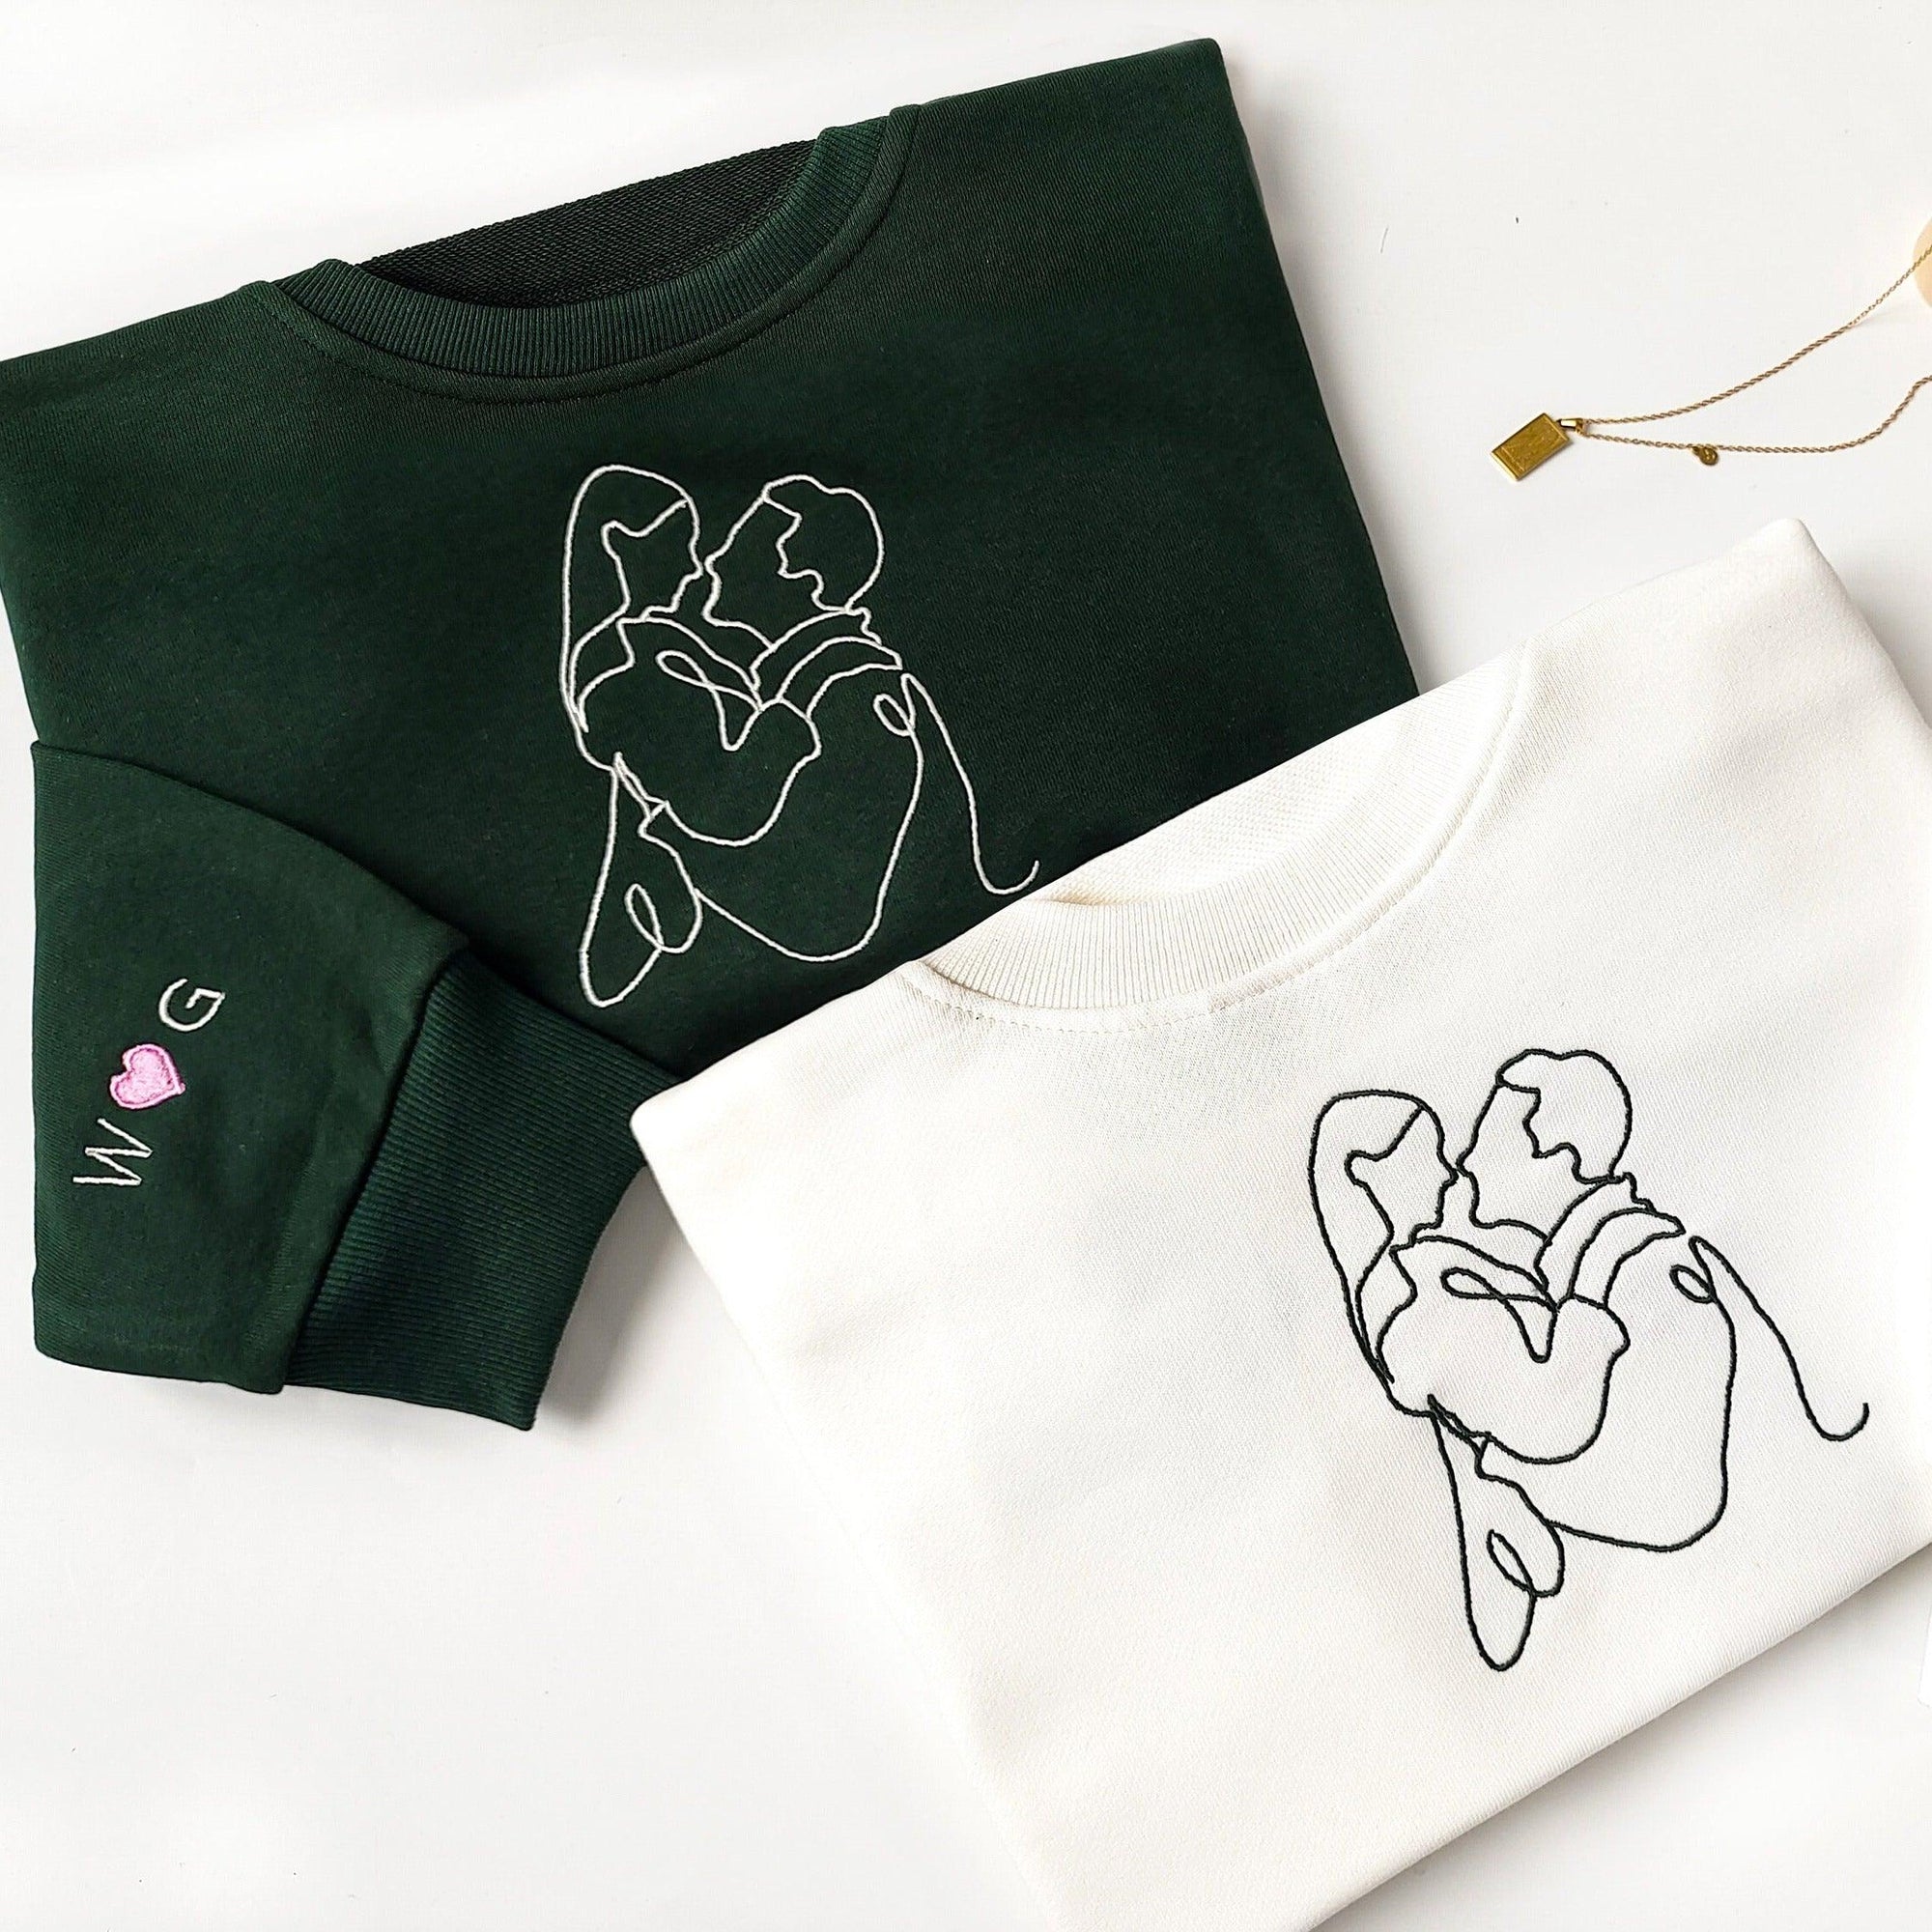 Custom Embroidered Sweatshirts For Couples, Custom Embroidered Portrait From Photo Matching Couple Sweatshirt Hoodie, Outline Photo Embroidered Sweater